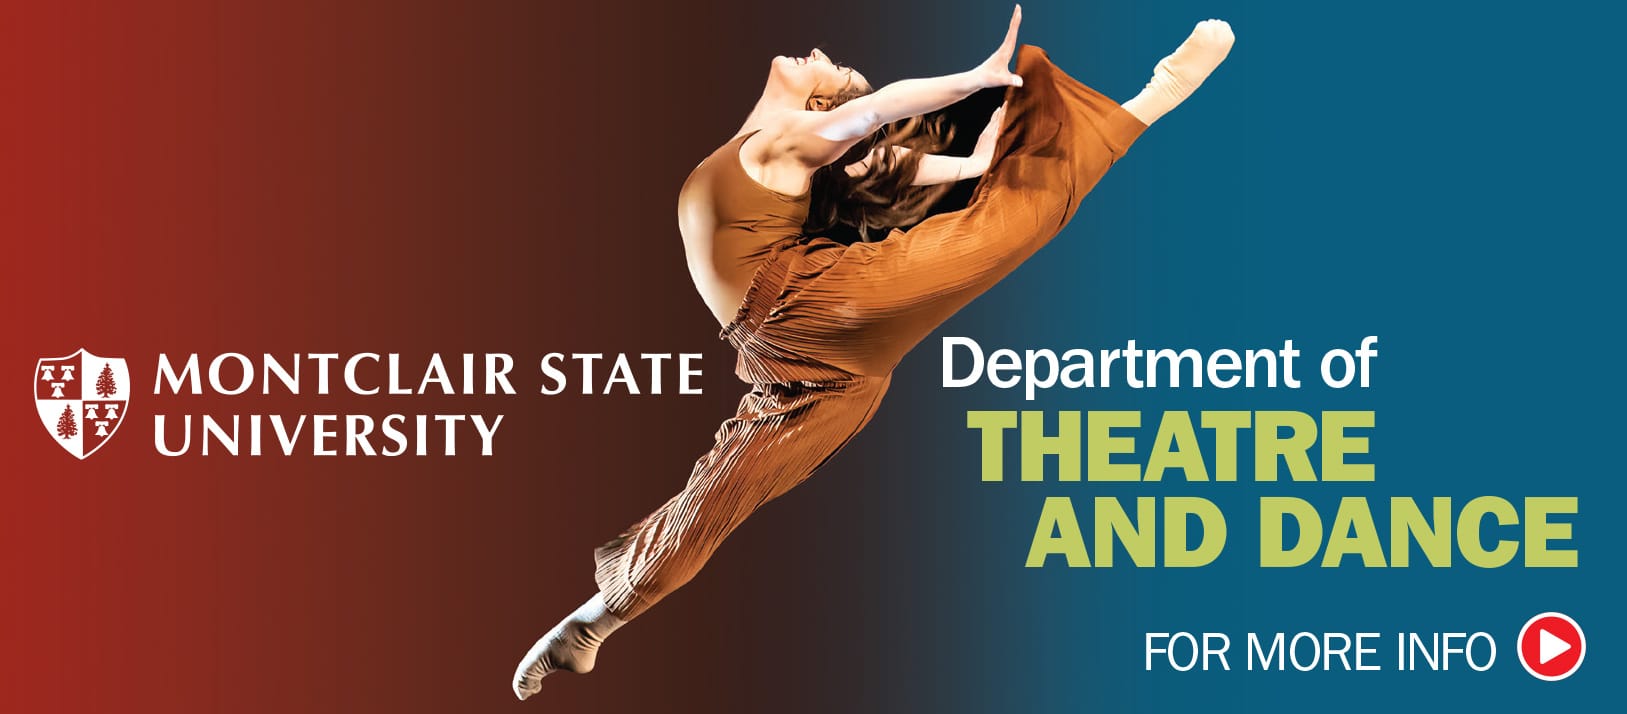 montclair state university department of theatre and dance